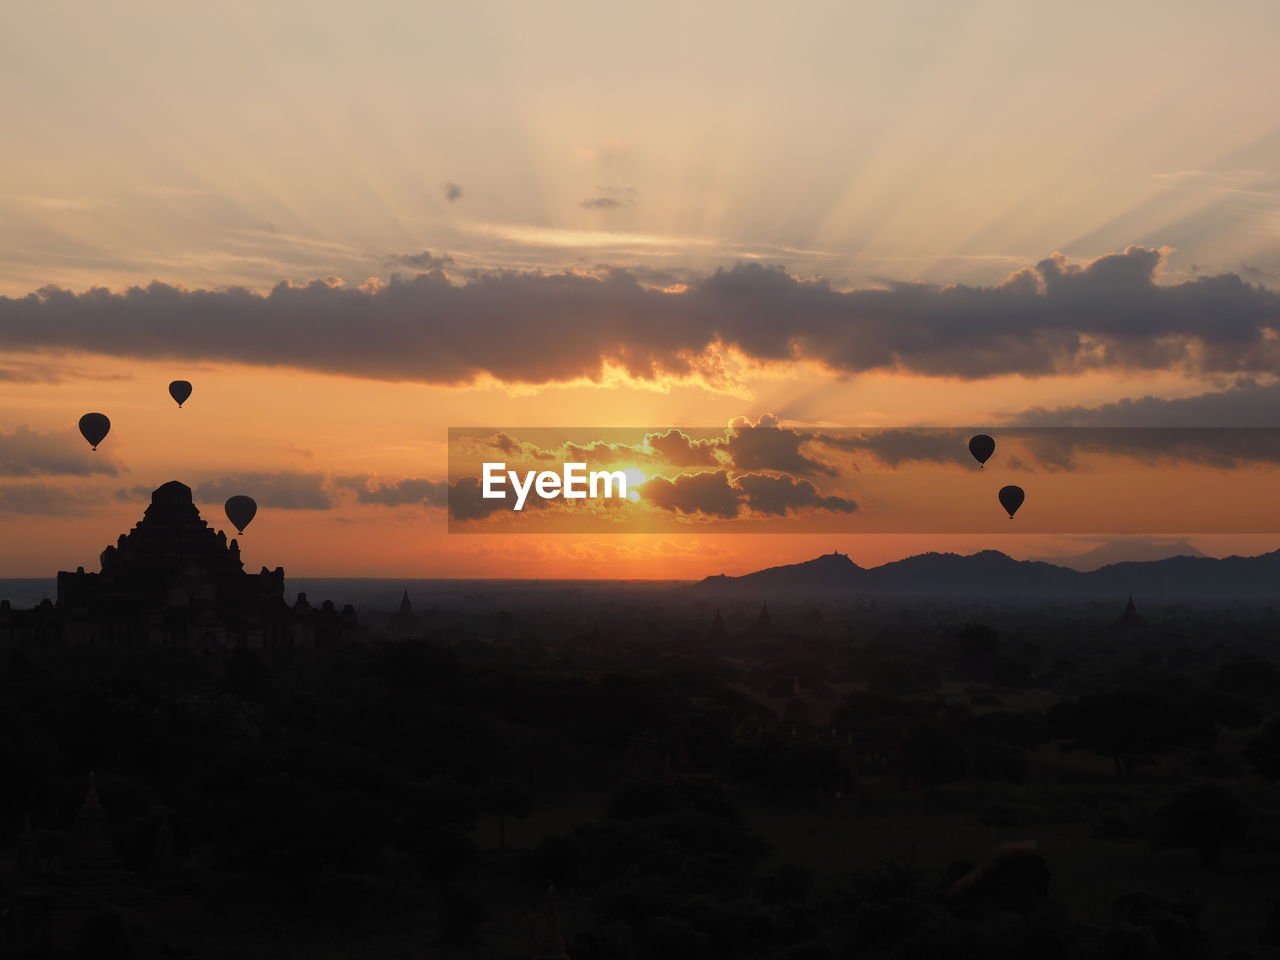 Silhouette hot air balloons flying over ancient temples against sky during sunset